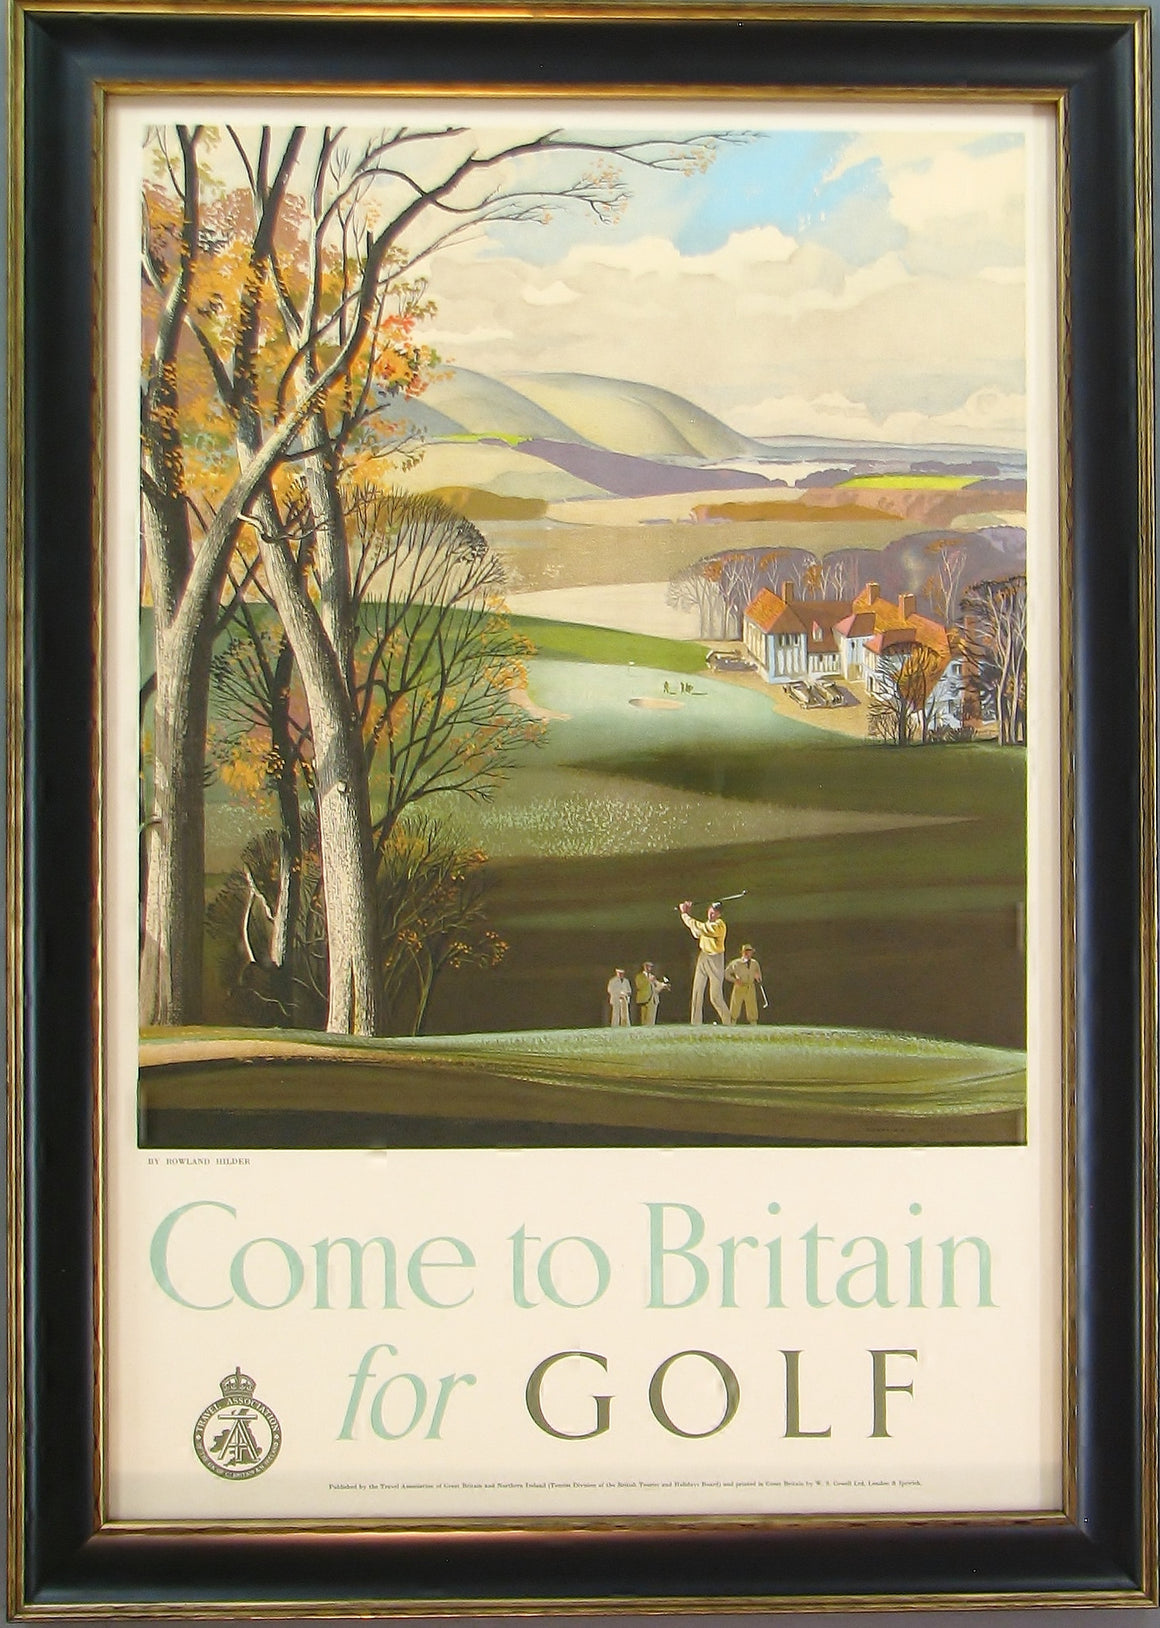 Come to Britain for Golf Vintage Travel Poster, Circa 1952 - The Great Republic